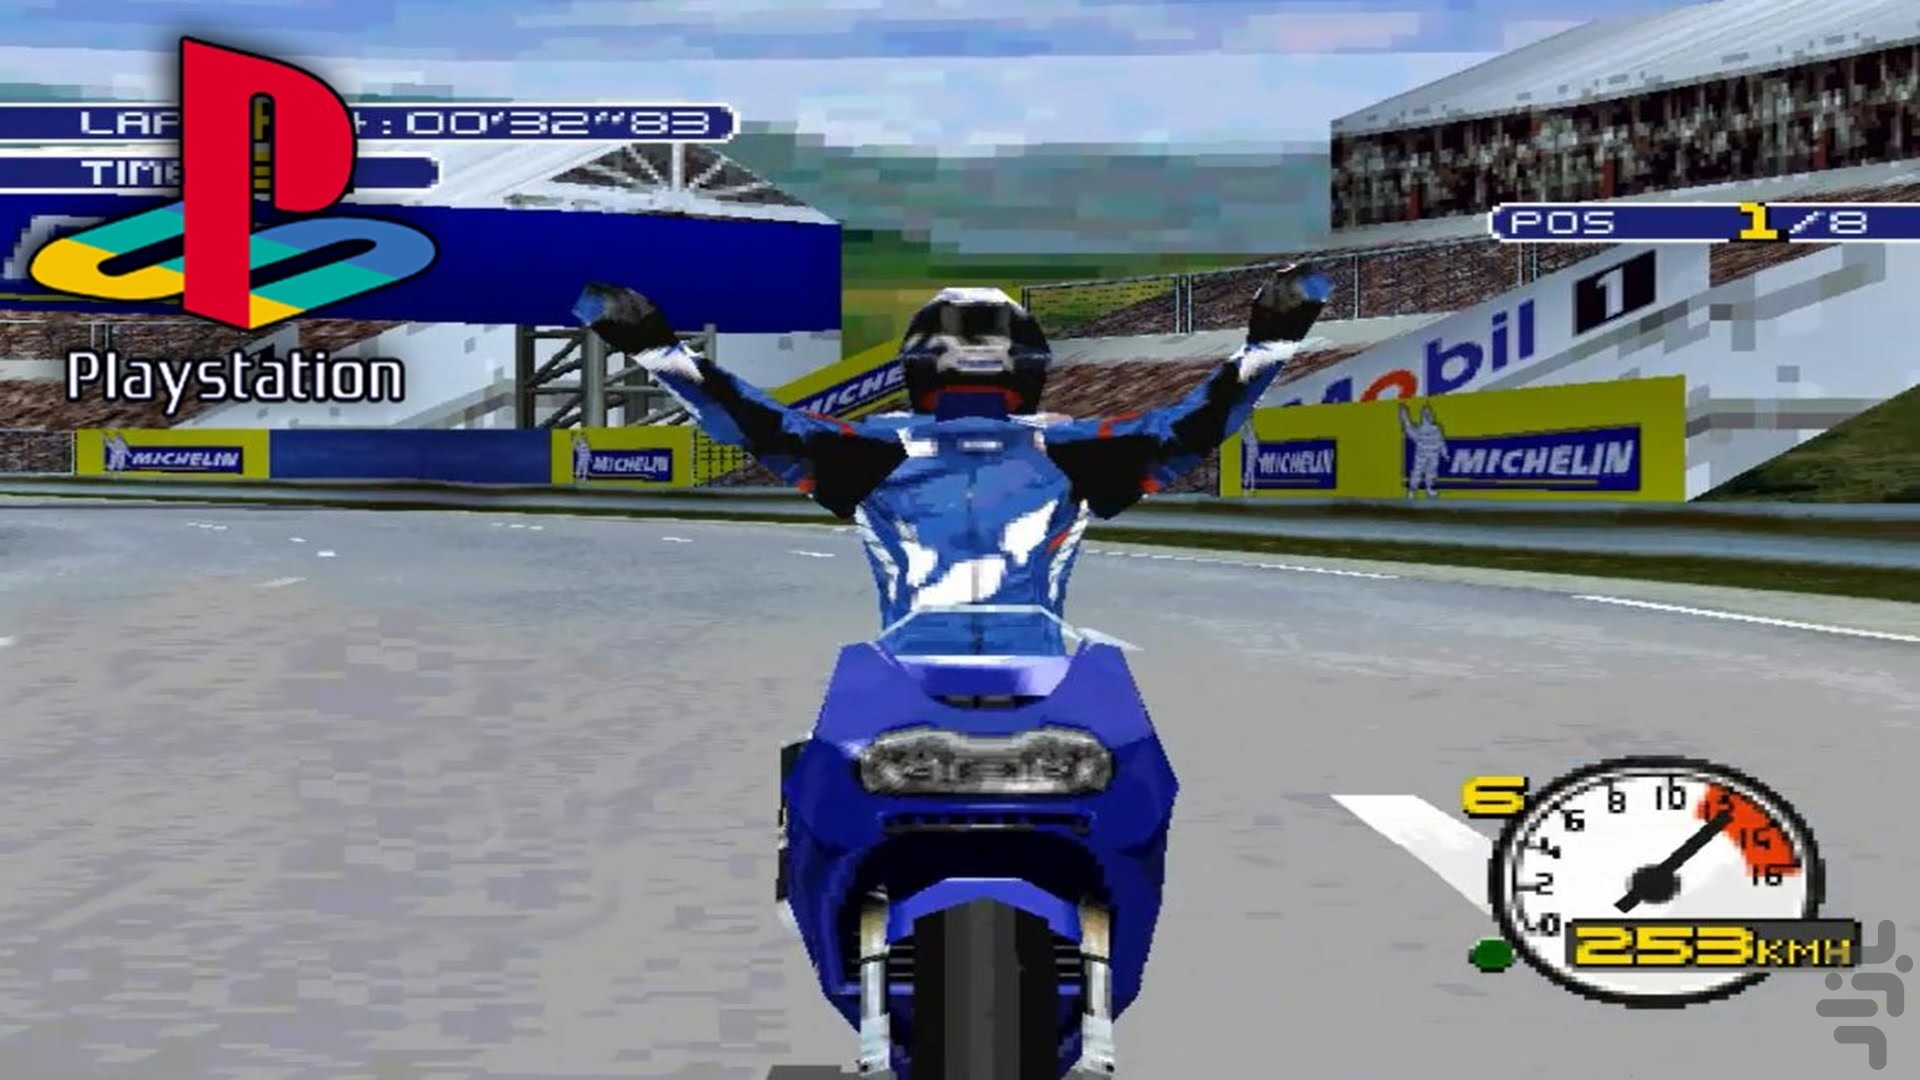 Moto Racer - Gameplay PSX / PS1 / PS One / HD 720P (Epsxe) 